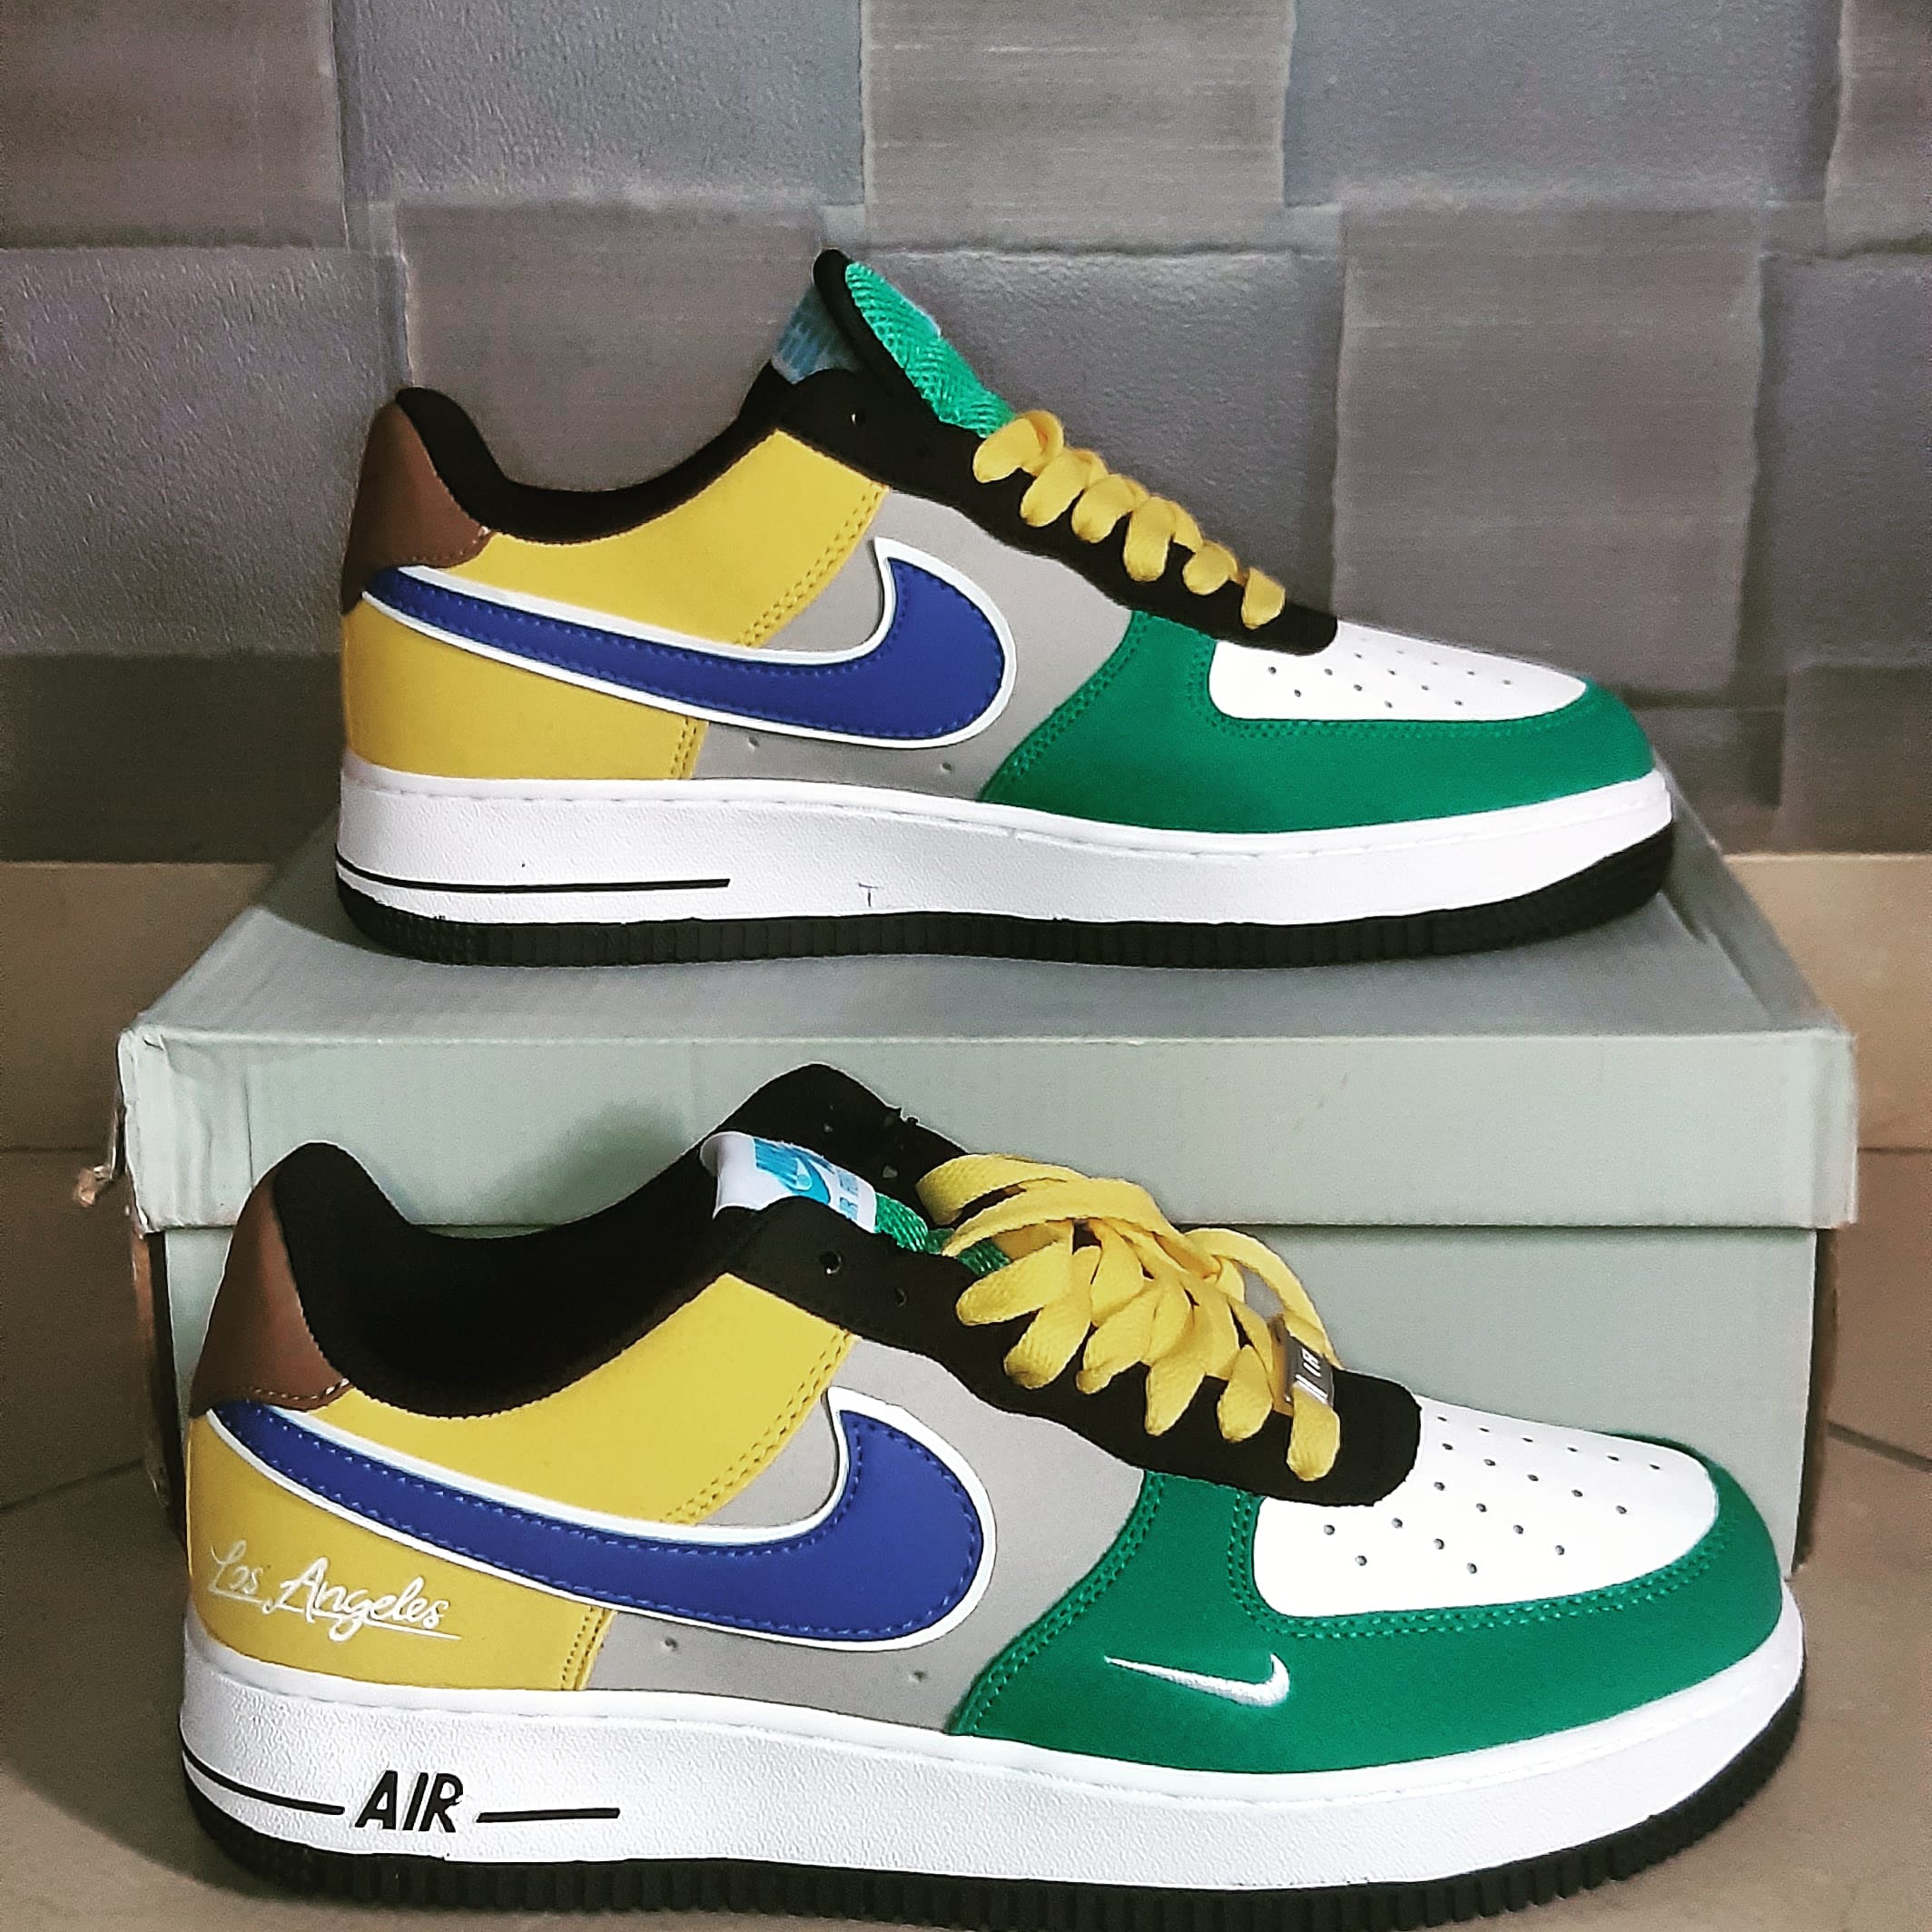 Nike Airforce 1 Los Angeles | Free Online Marketplace to Buy u0026 Sell in  Nigeria